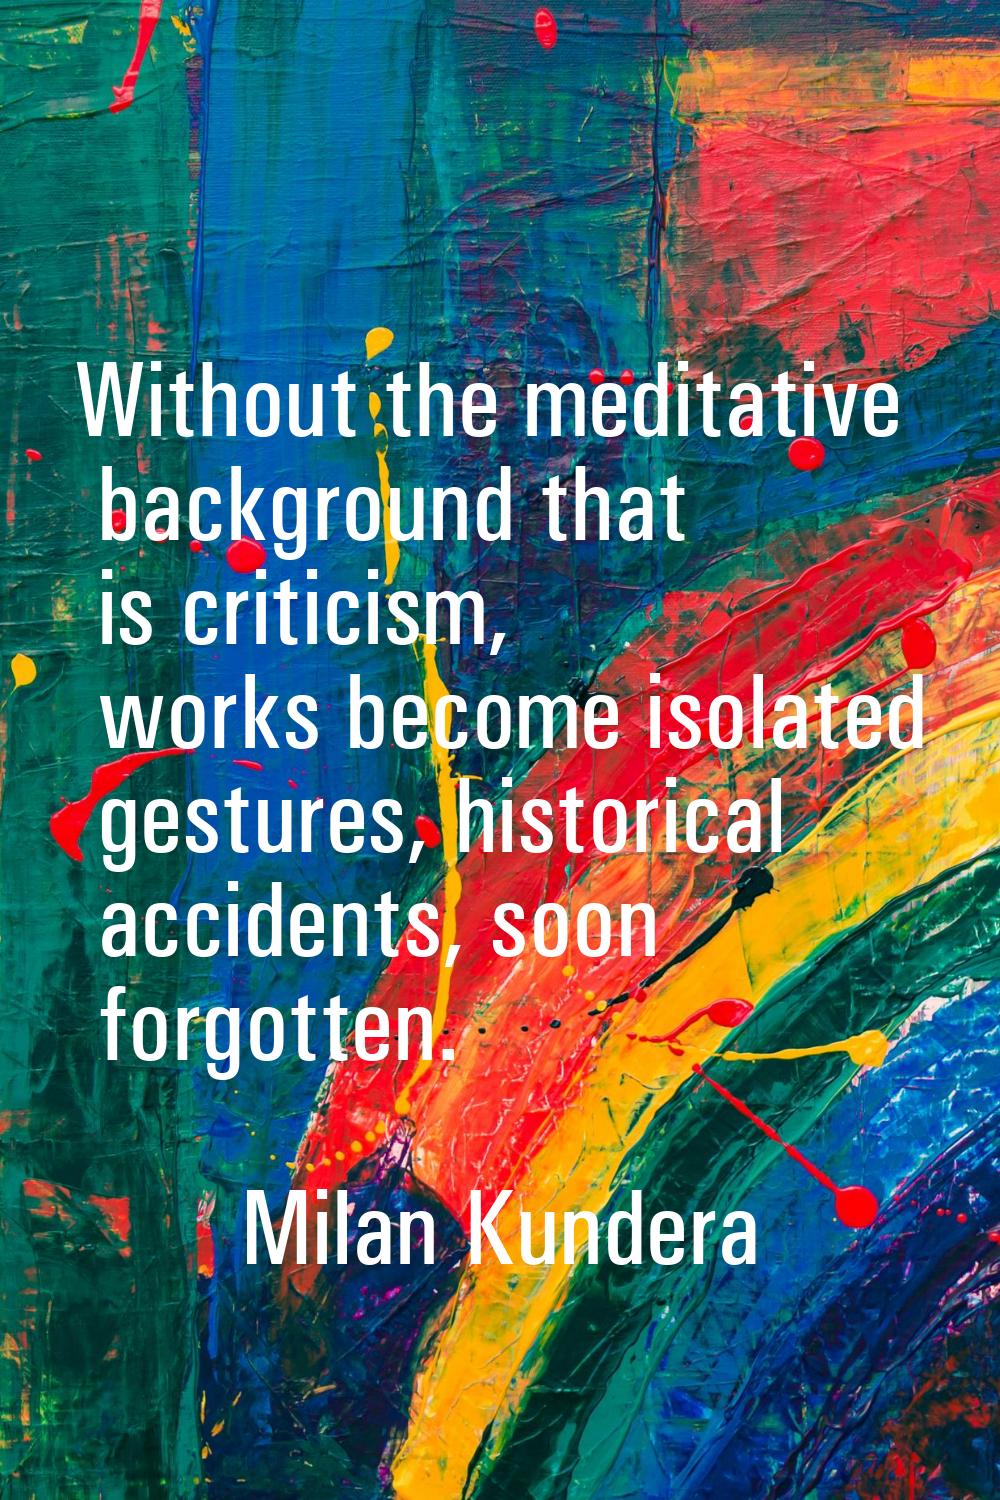 Without the meditative background that is criticism, works become isolated gestures, historical acc